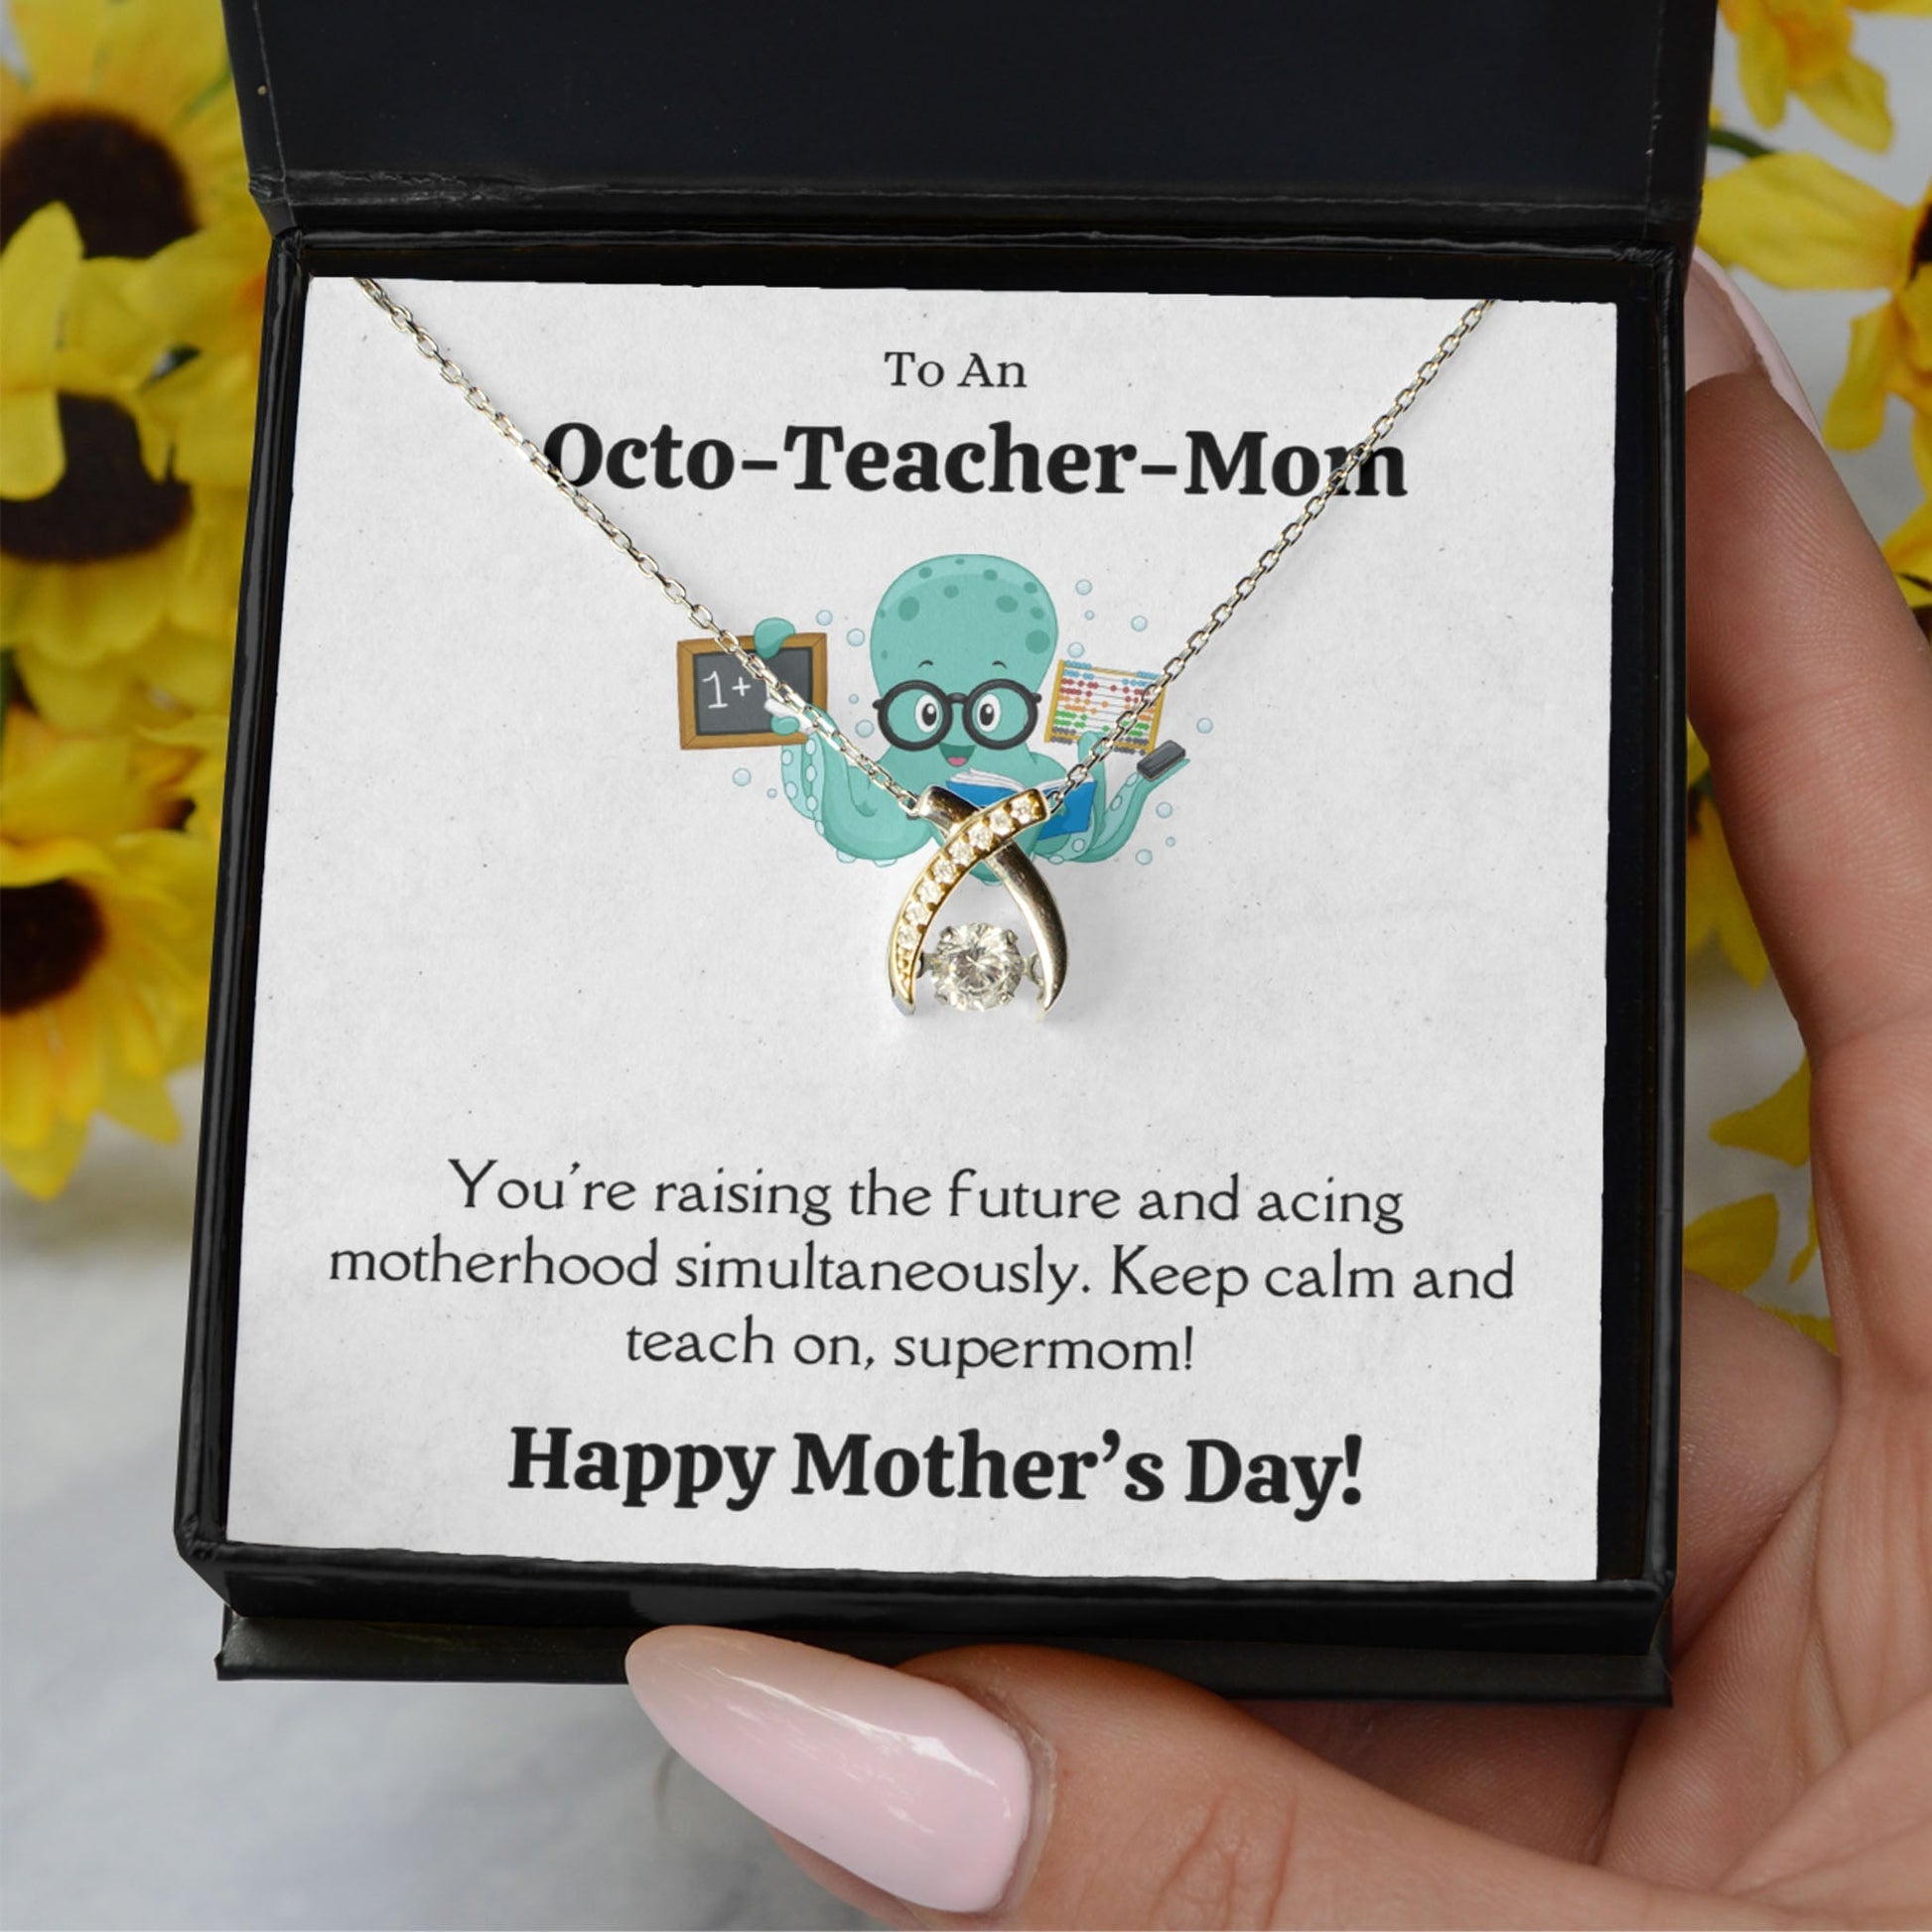 Personalized Necklaces + Message Cards - Wishbone Dancing Necklace -Octo-Teacher-Mom Card 